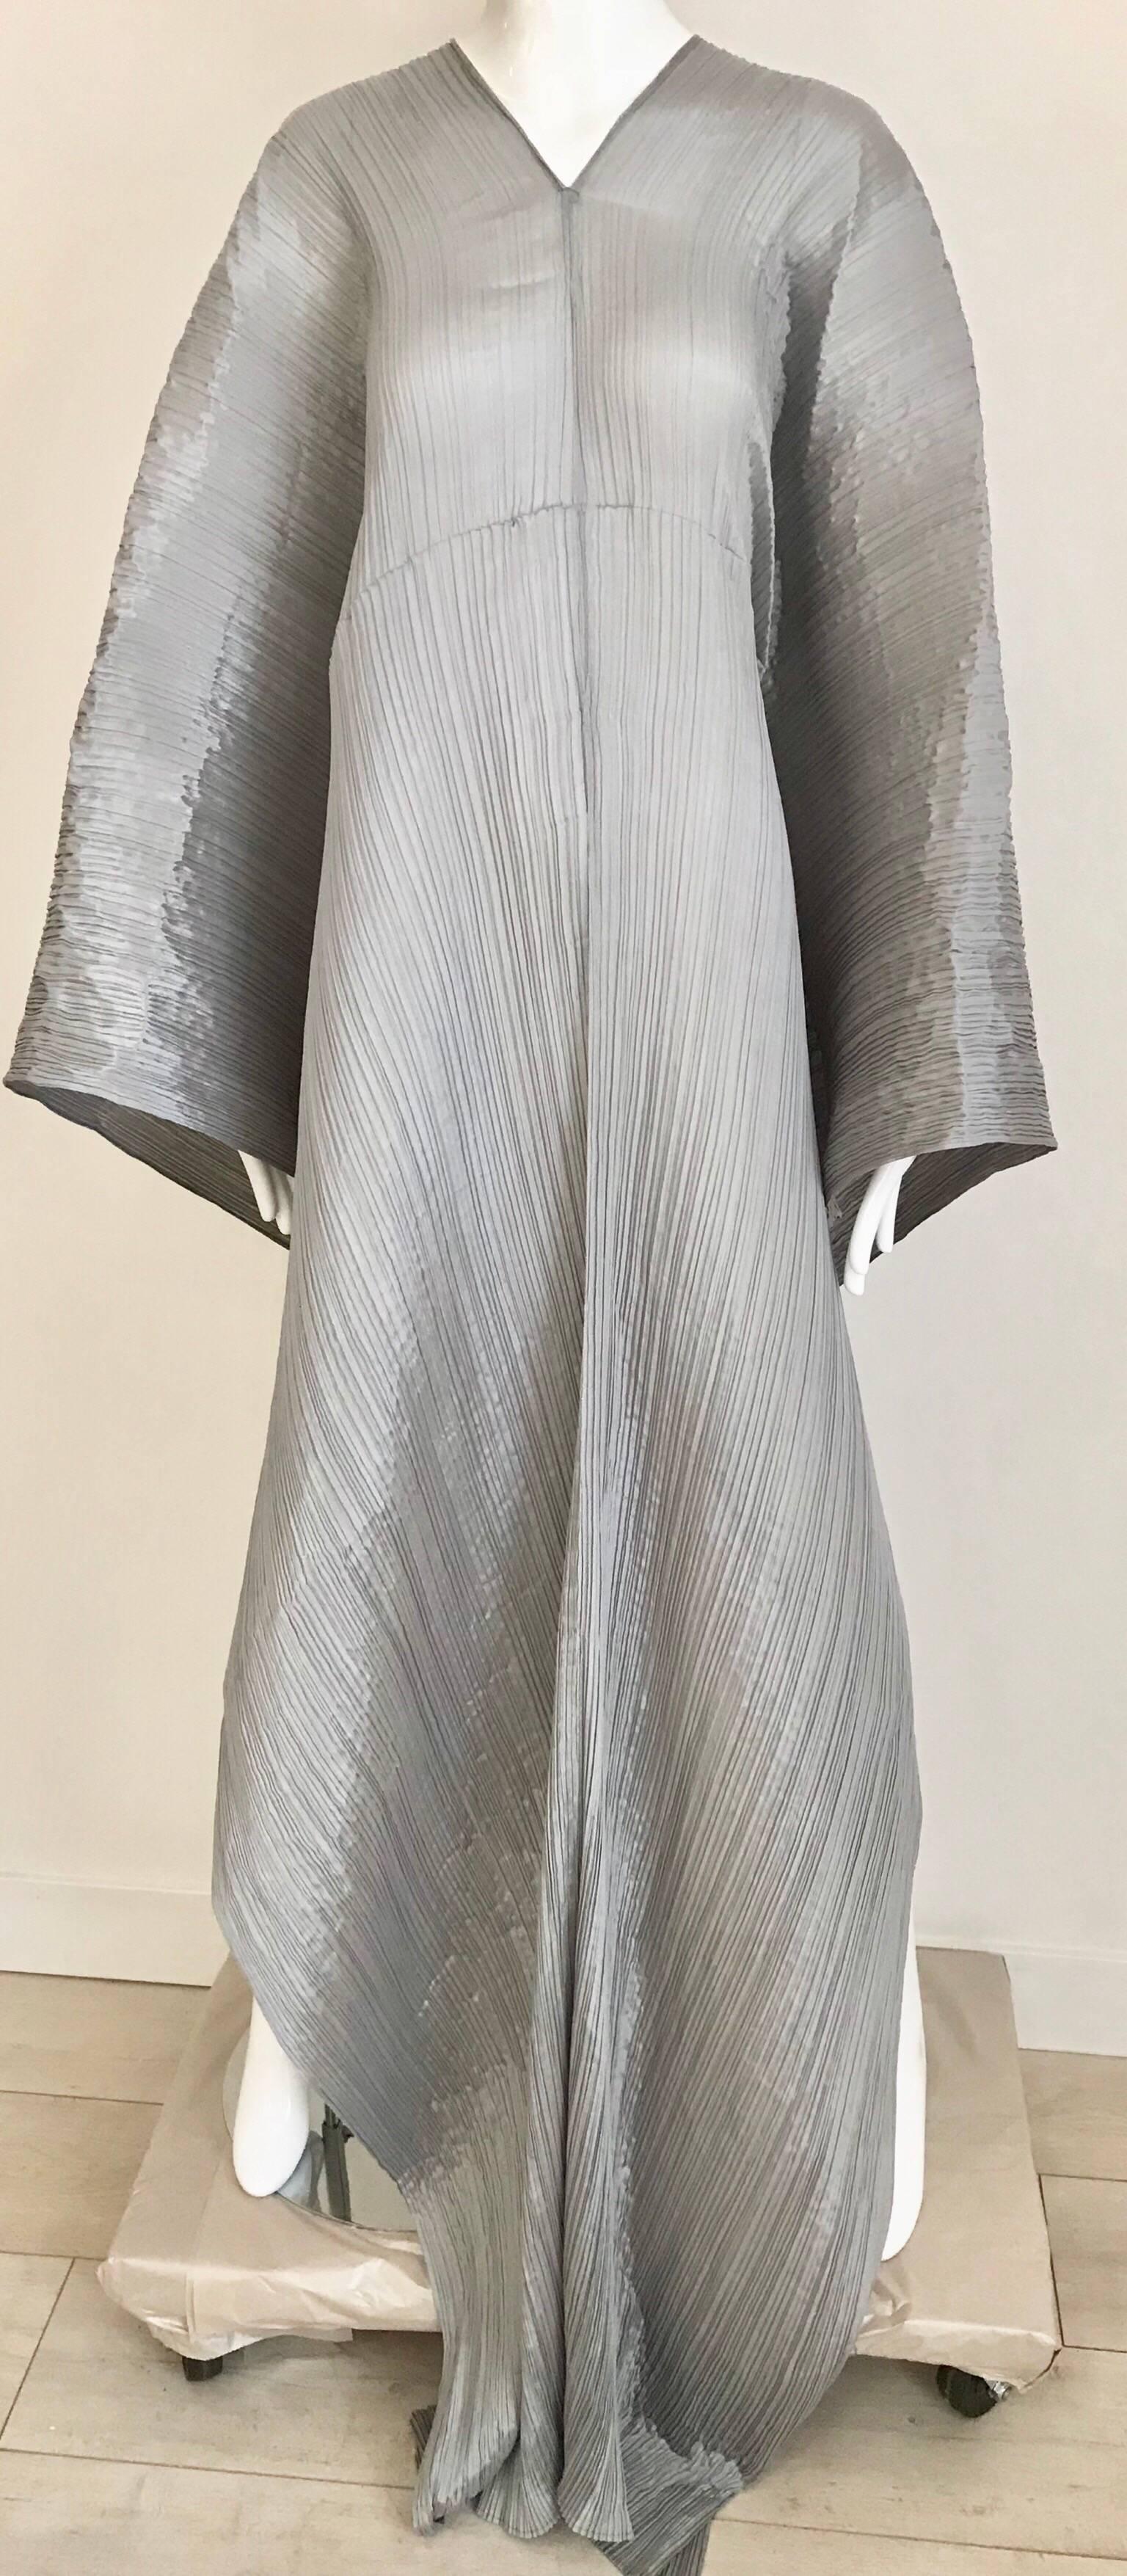 90s Issey miyake silver grey pleat please long and large shawl/ caftan/ dress.
Fit size 2/4/6/8/10